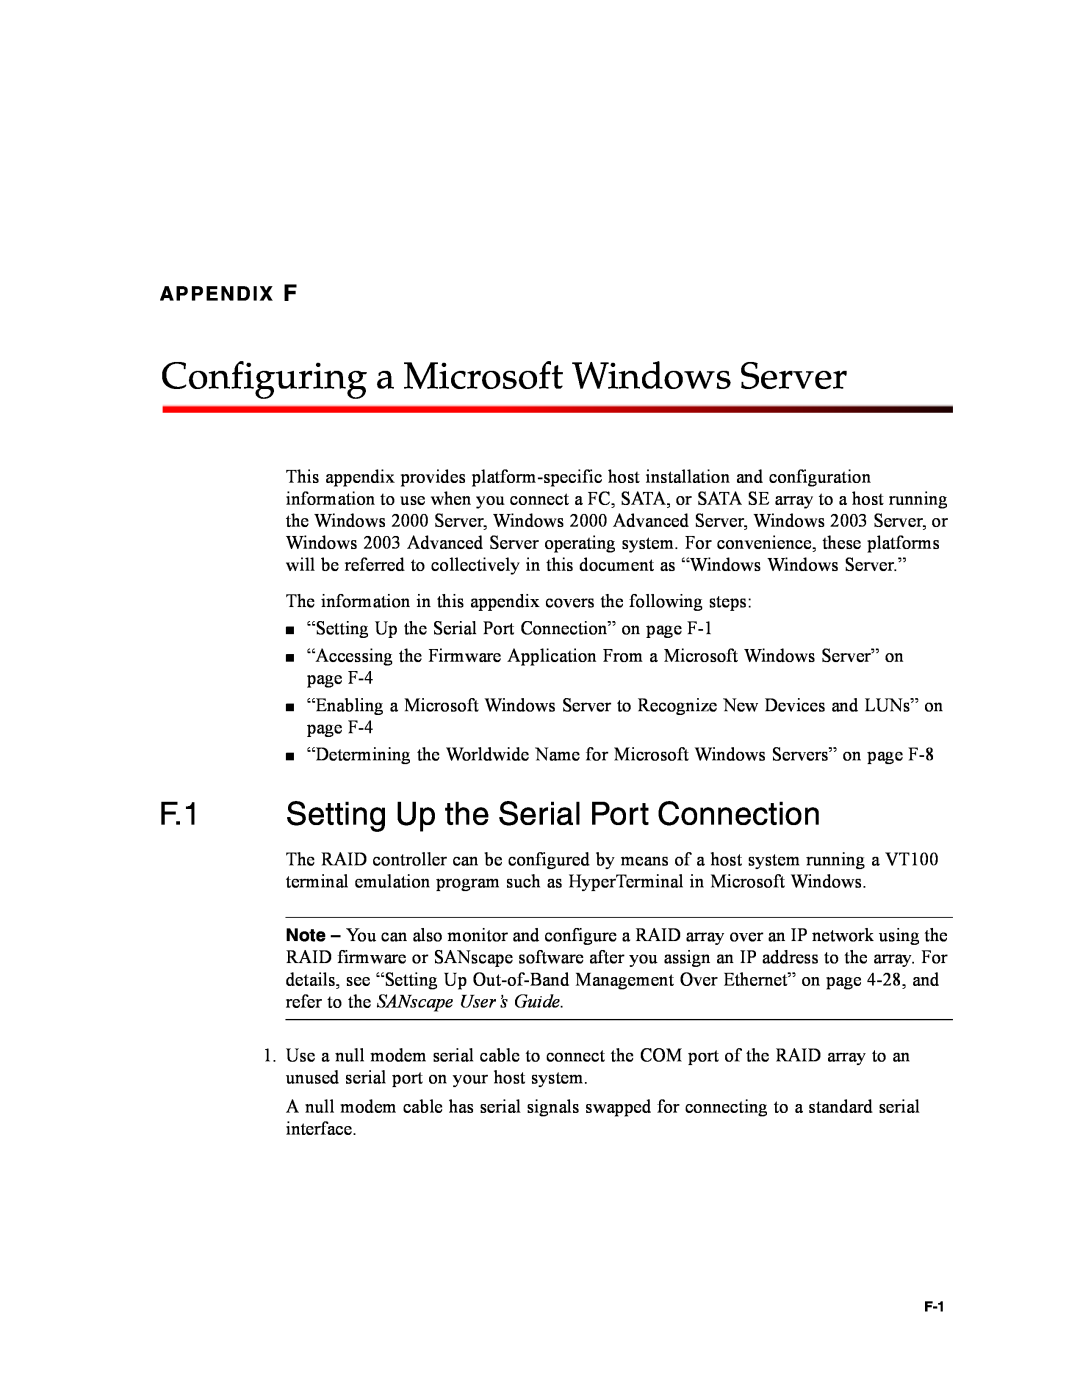 Dot Hill Systems II 200 FC Configuring a Microsoft Windows Server, F.1 Setting Up the Serial Port Connection, Appendix F 